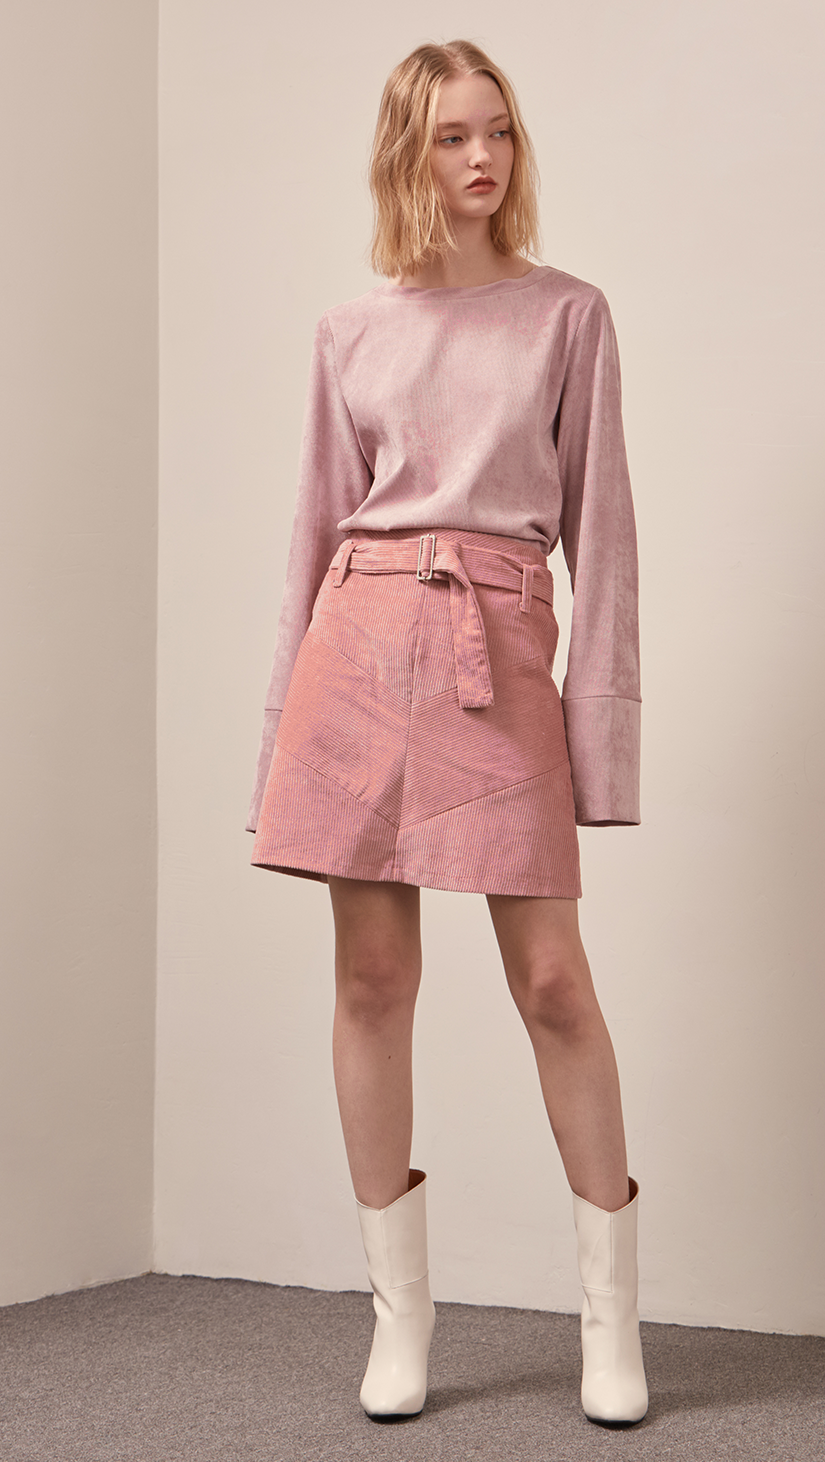 The Ellie Skirt in pink corduroy. With a high-waisted polished A-line style with belt loops. Knee-length skirt.